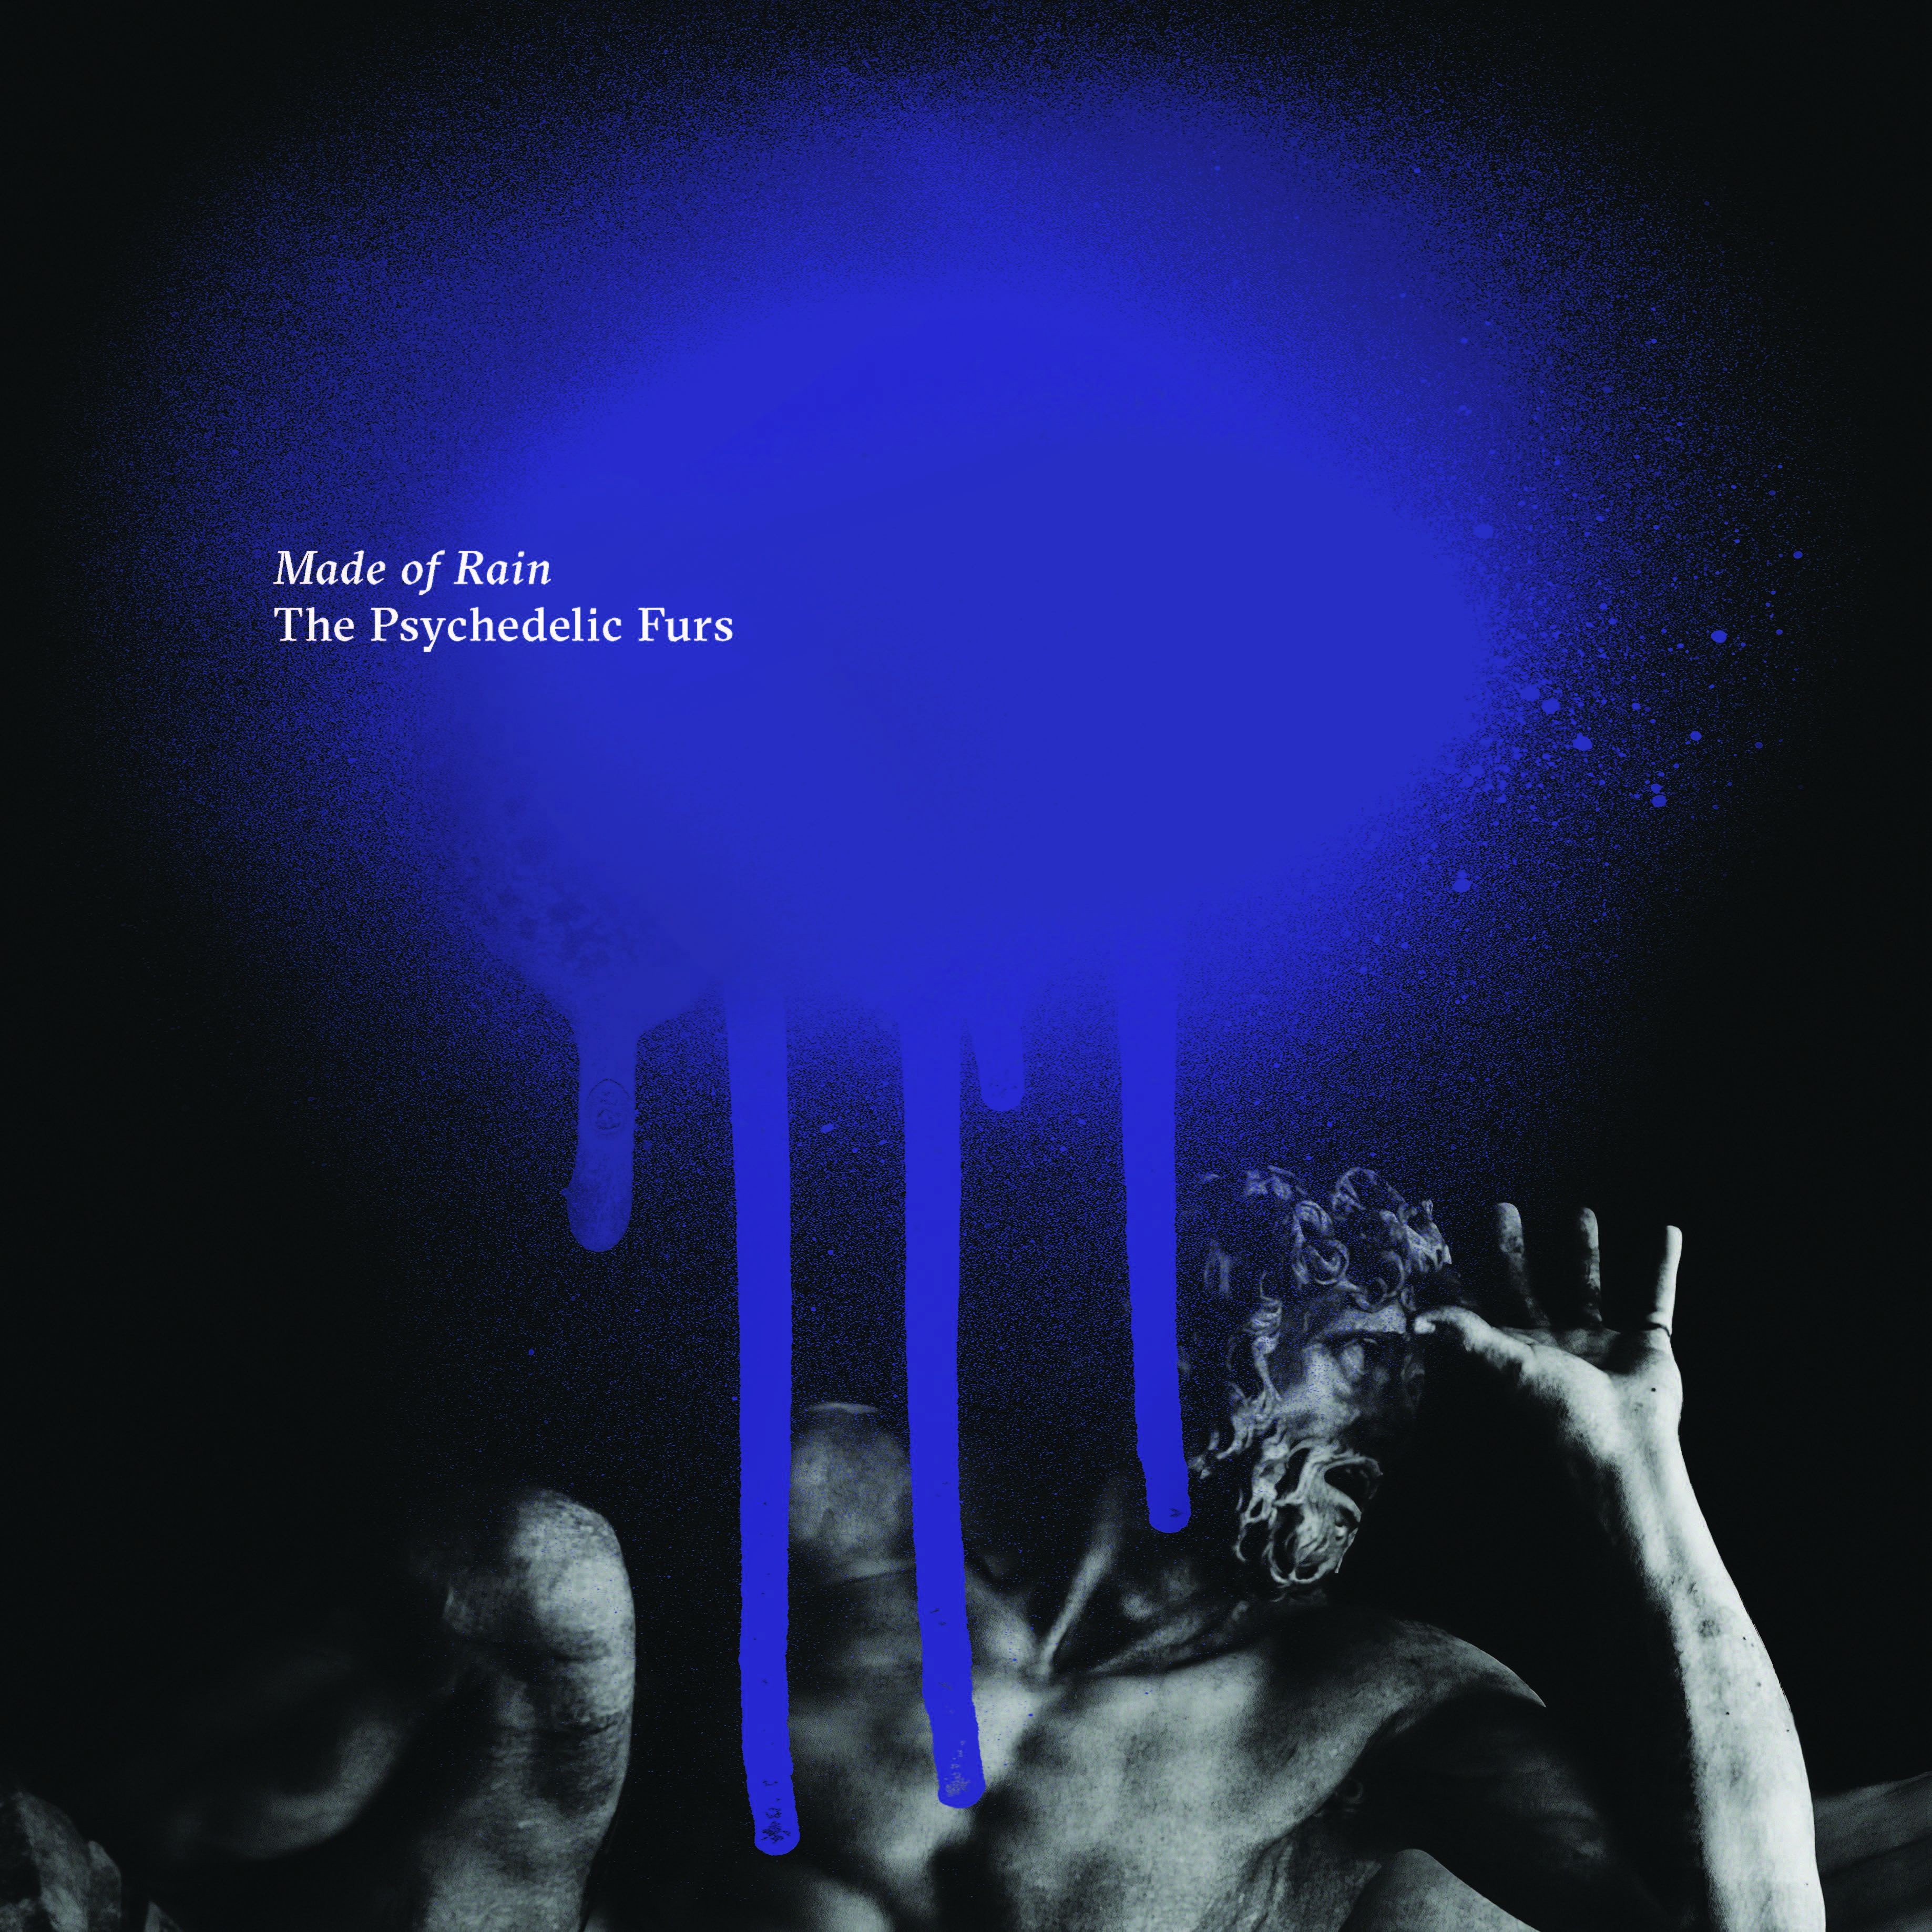 News – The Psychedelic Furs – Come All Ye Faithful